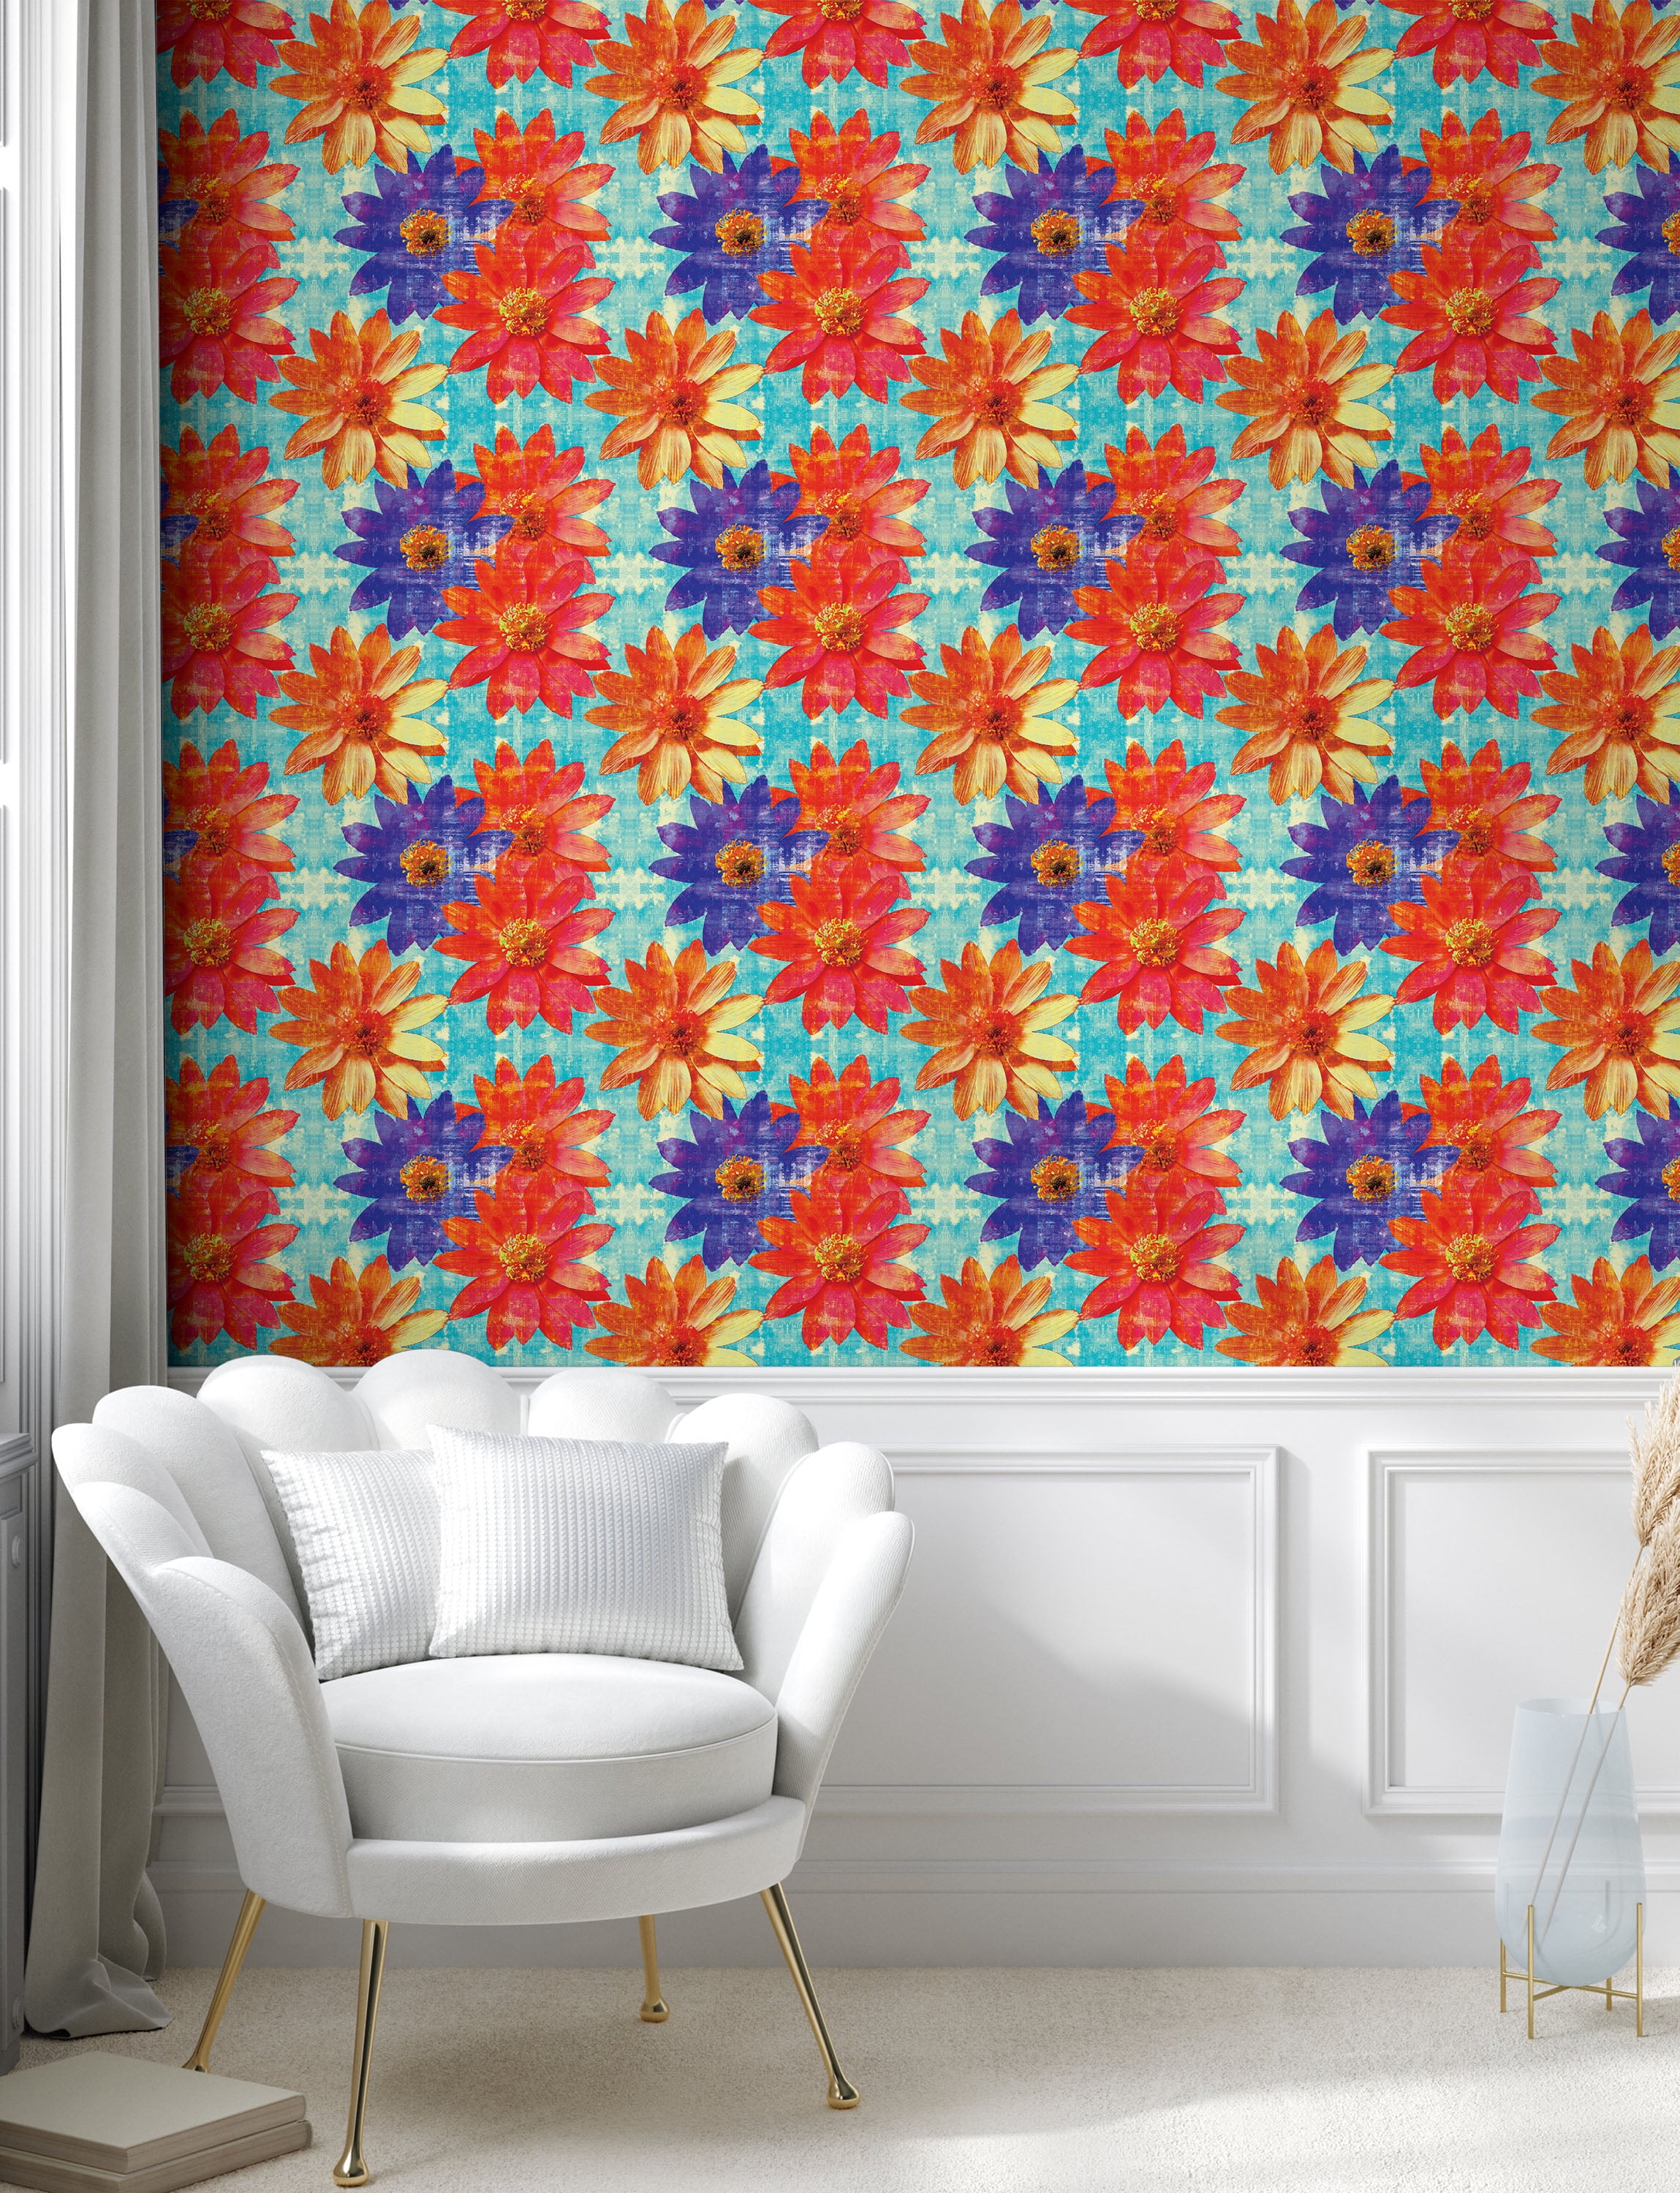 Flowers Peel & Stick Wallpaper, Grunge Rustic Effect Vintage Blossoming  Summer Adonis Petals Print, Self-Adhesive Living Room Kitchen Accent, 3  Sizes, Dark Coral Violet and Blue, by Ambesonne - Walmart.com